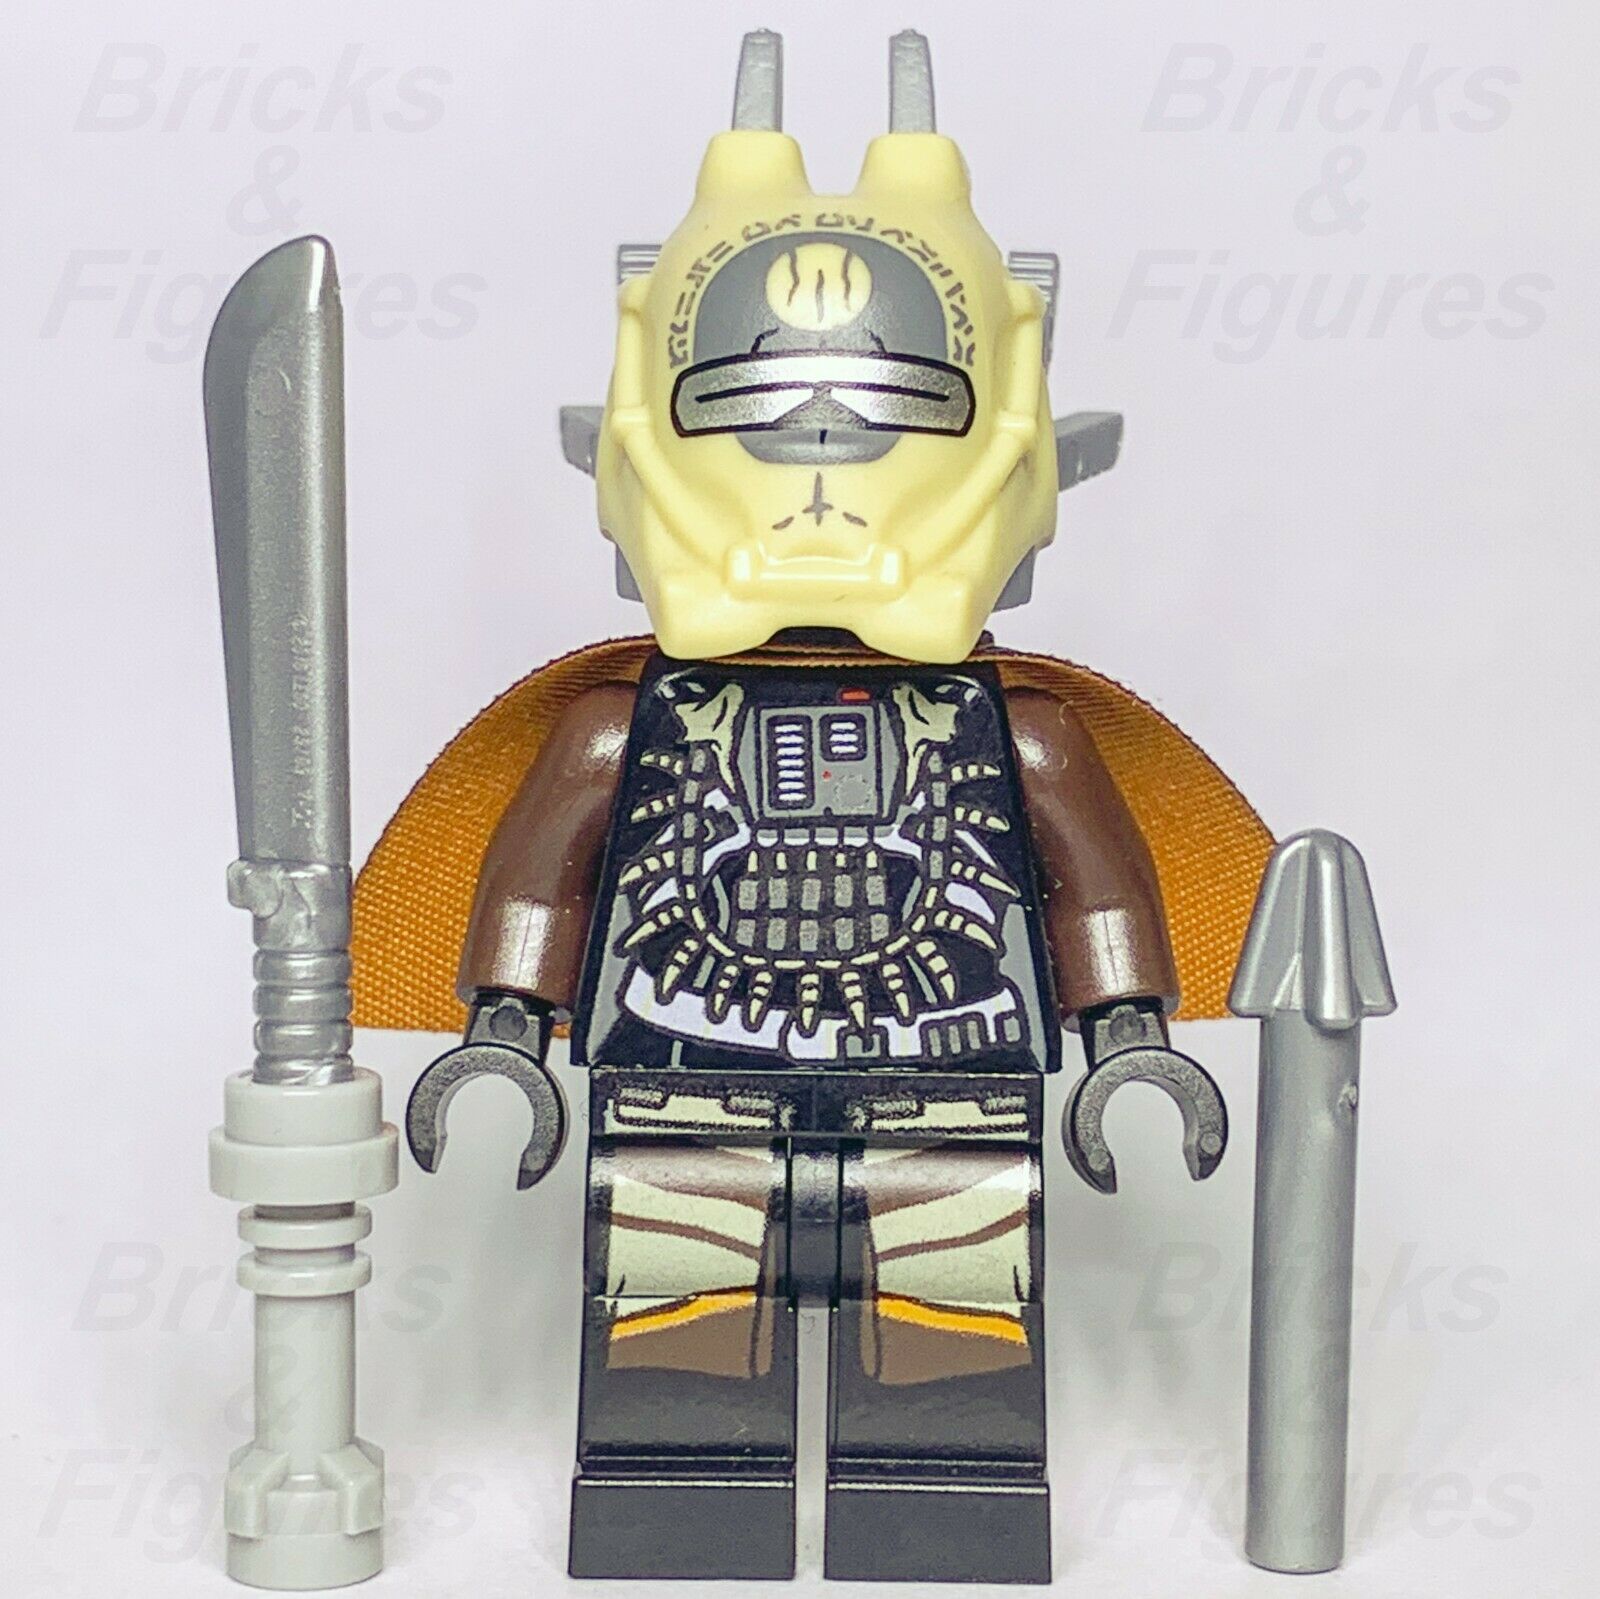 New Star Wars LEGO Enfys Nest Resistance Fighter Minifigure from Solo Set 75215 - Bricks & Figures